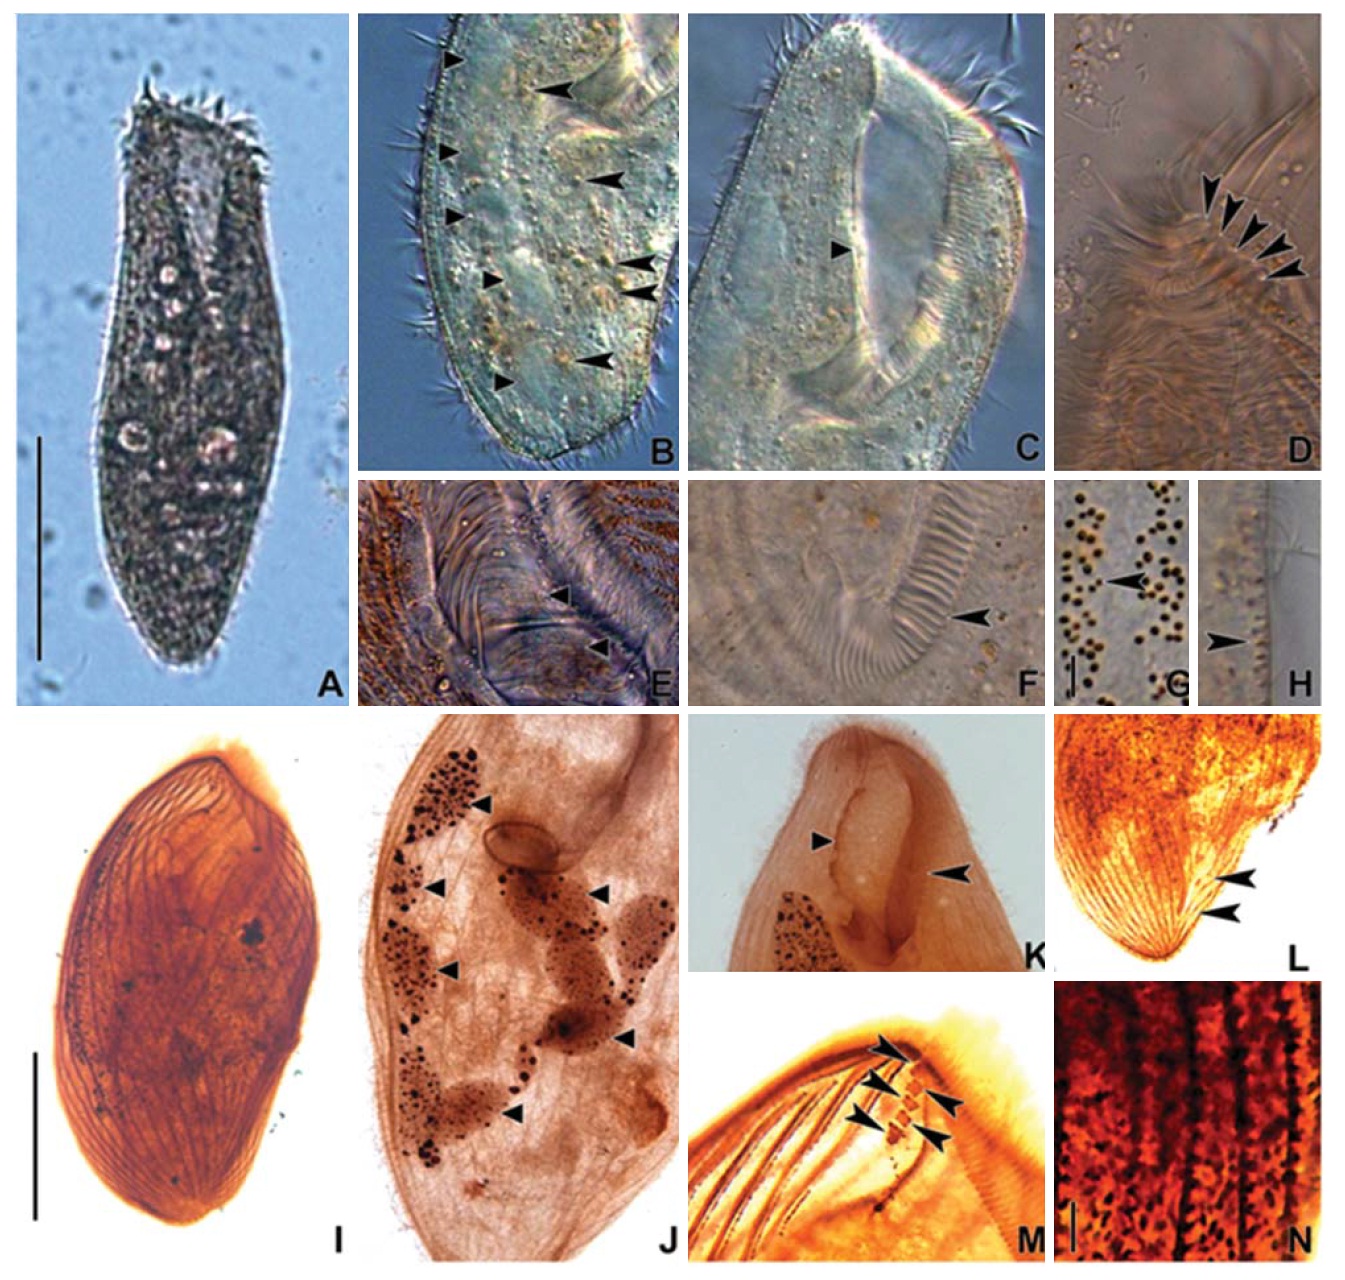 Microphotographs of Condylostoma curva from live specimens (A-H) and after protargol impregnation (I-N). A, Ventral view of a typical individual; B, Moniliform macronuclear nodules (triangular arrowheads) and cytoplasmic inclusion (arrowheads); C, Buccal field (triangular arrowhead); D, Frontal cirri (arrowheads); E, Buccal field to indicate the stripes of inner wall (triangular arrowheads); F, Proximal end of adoral zone of membranelles (arrowhead); G, Pattern of cortical granules (arrowhead); H, Lateral view of cortical granules (arrowhead); I, Ventral side view; J, Impregnated macronuclear nodules (triangular arrowheads); K, Paroral membrane (triangular arrowhead) and adoral zone of membranelles (arrowhead); L, Suture (arrowheads); M, Frontal cirri (arrowheads); N, Impregnated cortical granules. Scale bars: A, I=100 μm, G, N=5 μm.